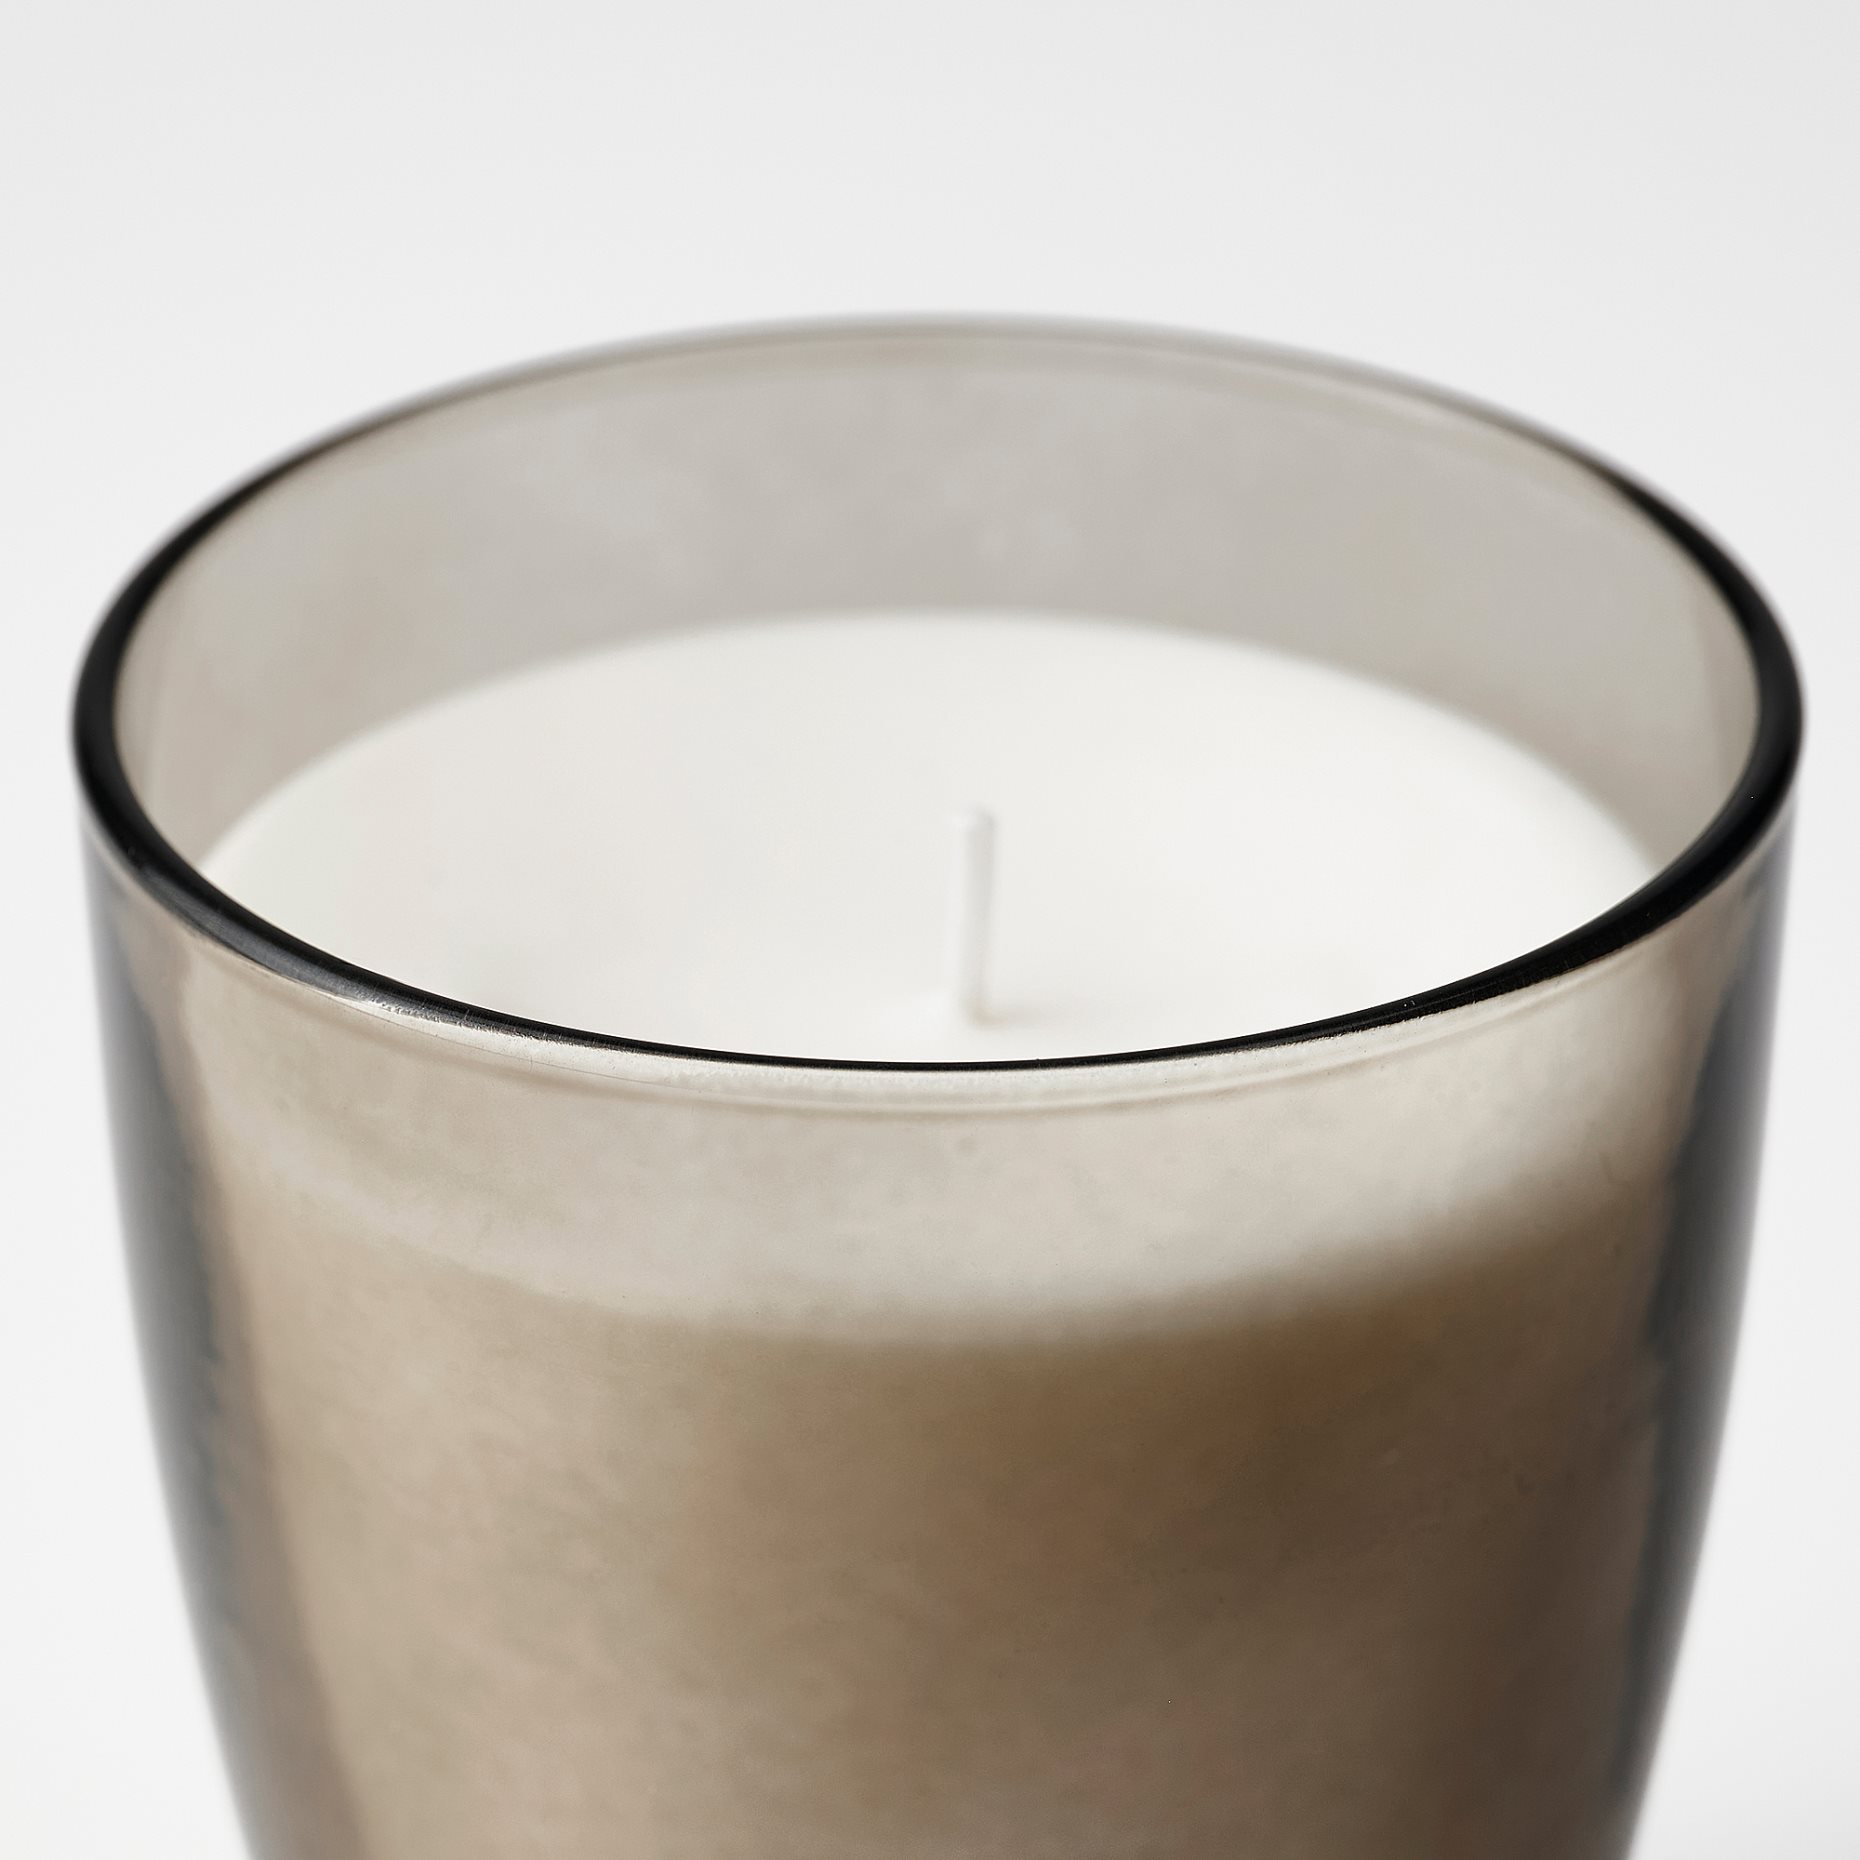 ENSTAKA, scented candle in glass/Bonfire, 50 hr, 805.024.13